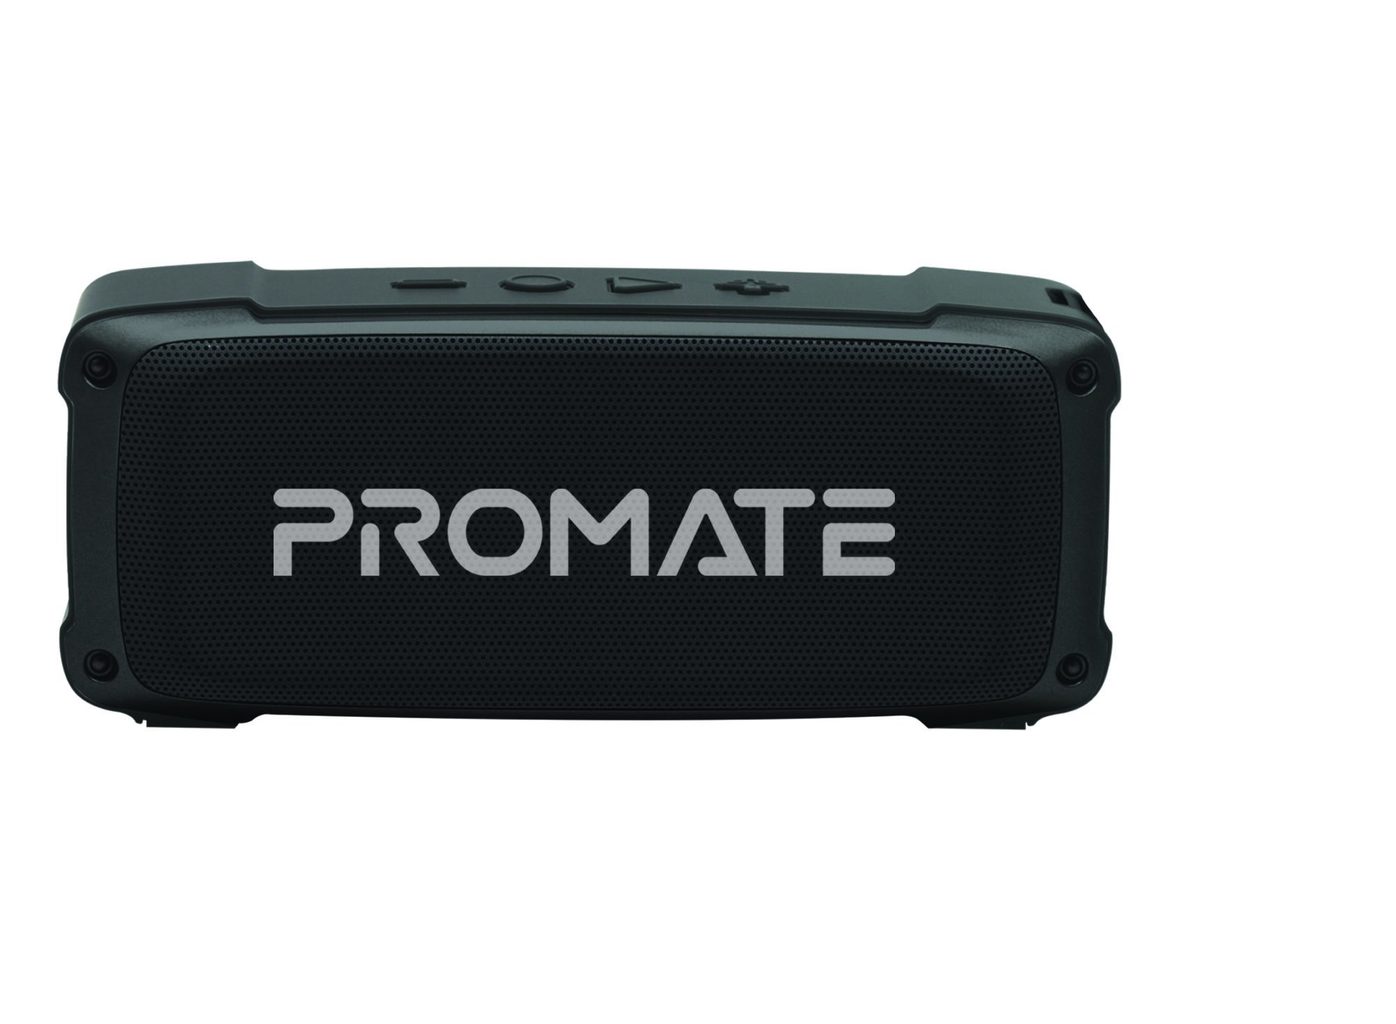 Promate Bluetooth Speaker, Premium 6W HD Rugged Wireless Speaker with 4H Playtime, Built-in Mic, FM Radio, 3.5mm Aux Port, TF Card Slot and USB Media Port for iPhone 12, iPad Pro, iPod, Android, OutBeat Black